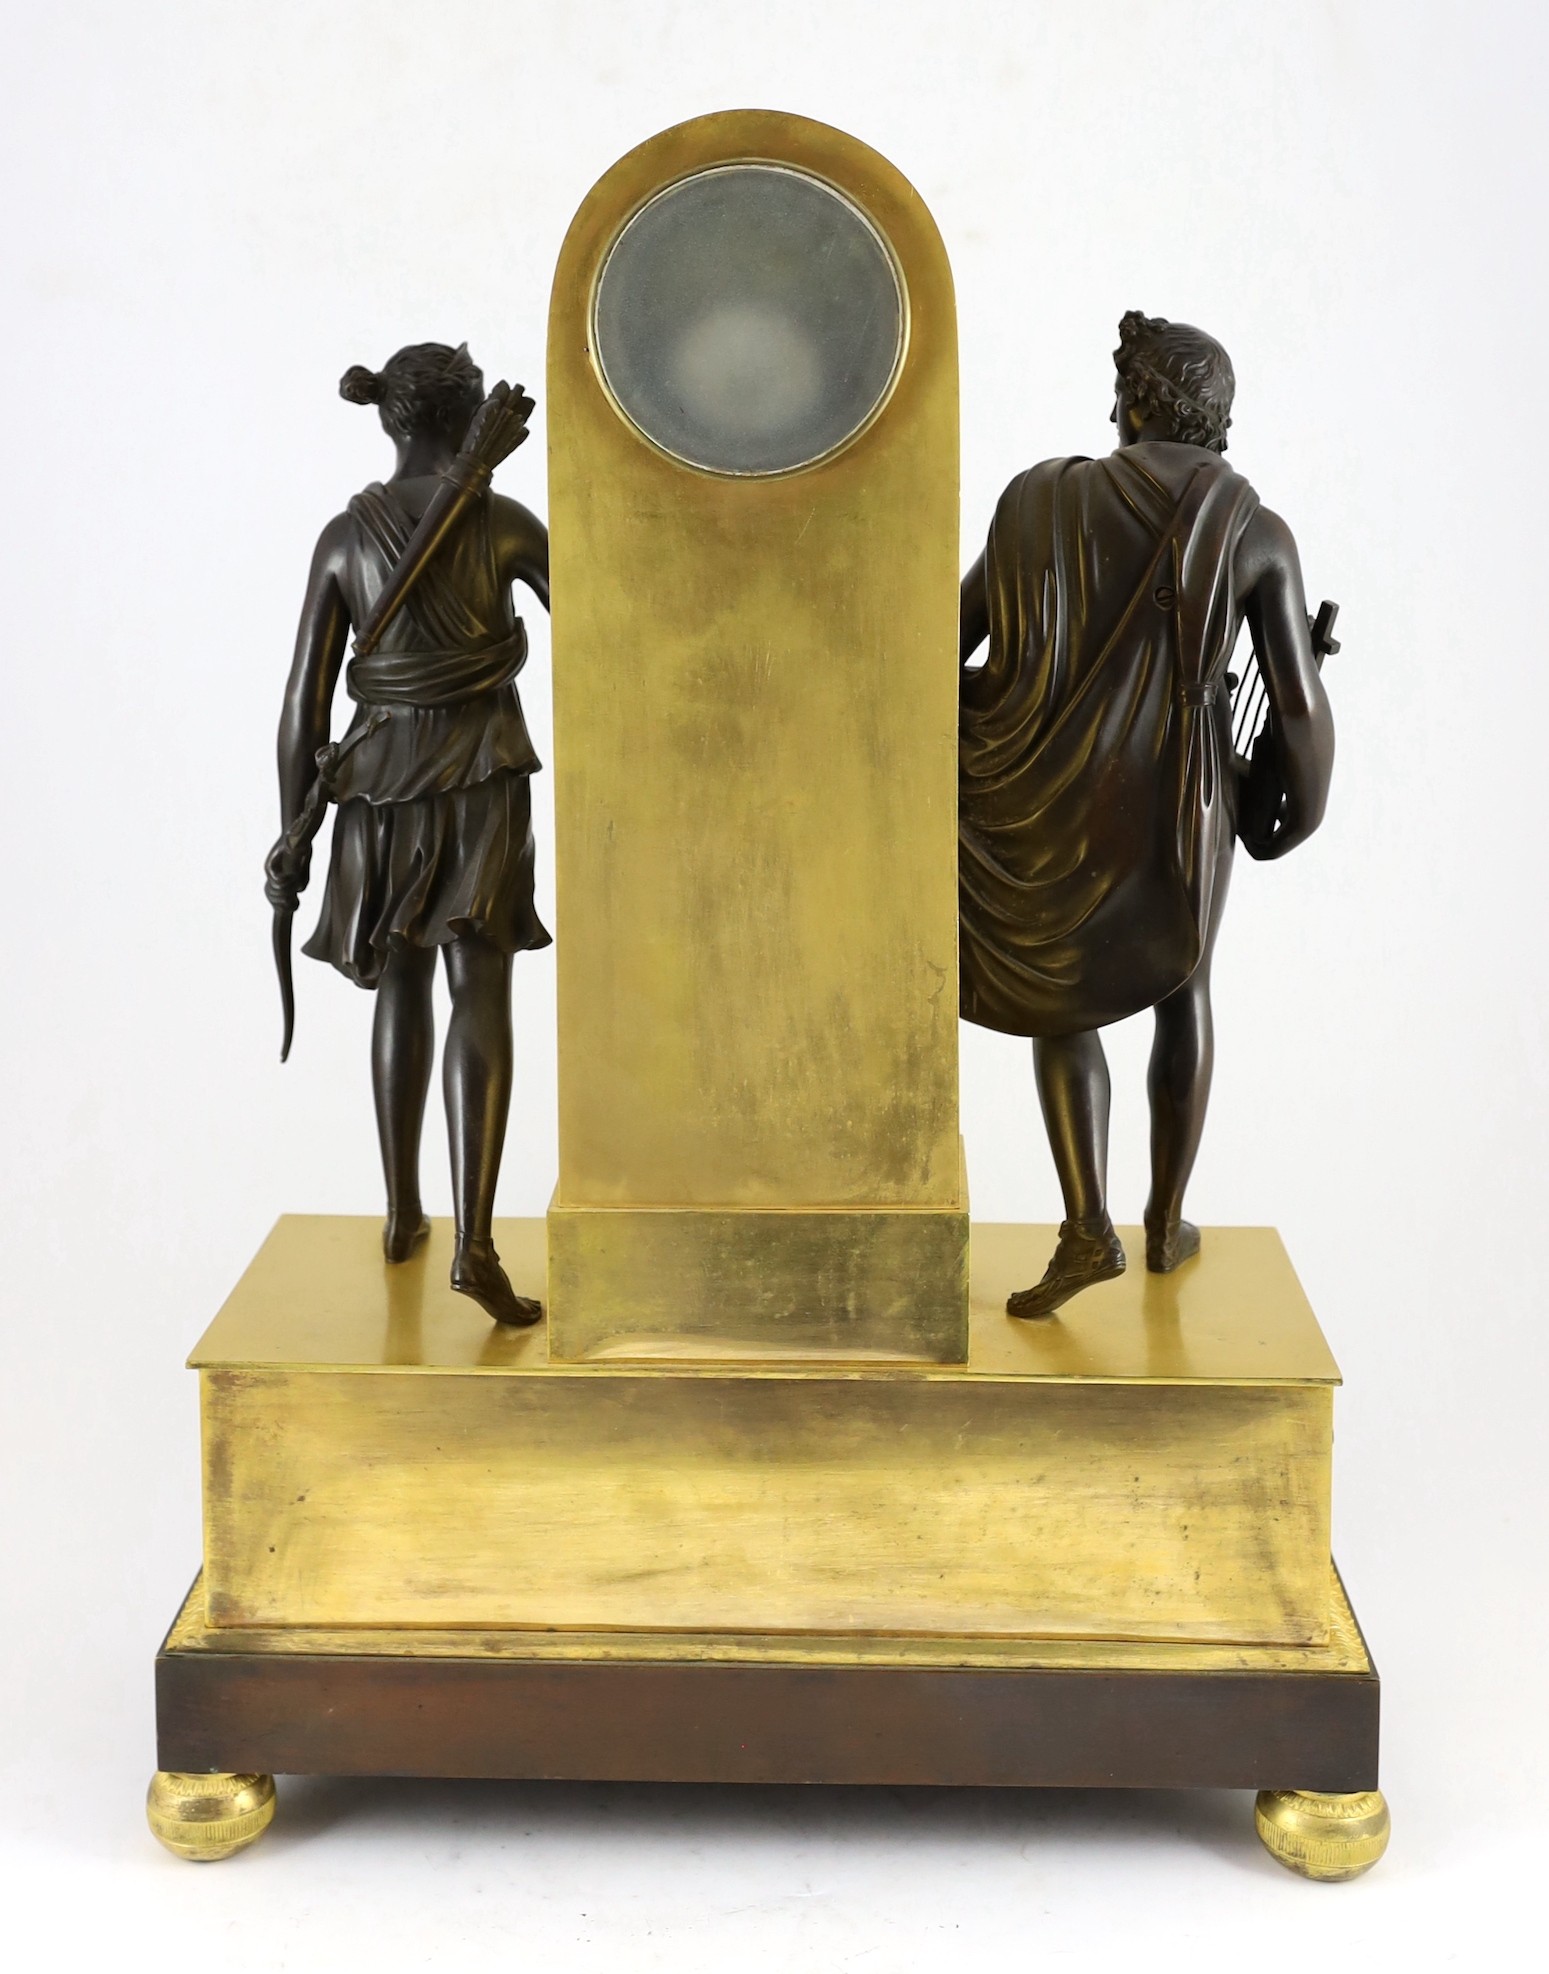 A 19th century French Louis XVI style bronze and ormolu mantel clock, surmounted with figures of - Image 4 of 5